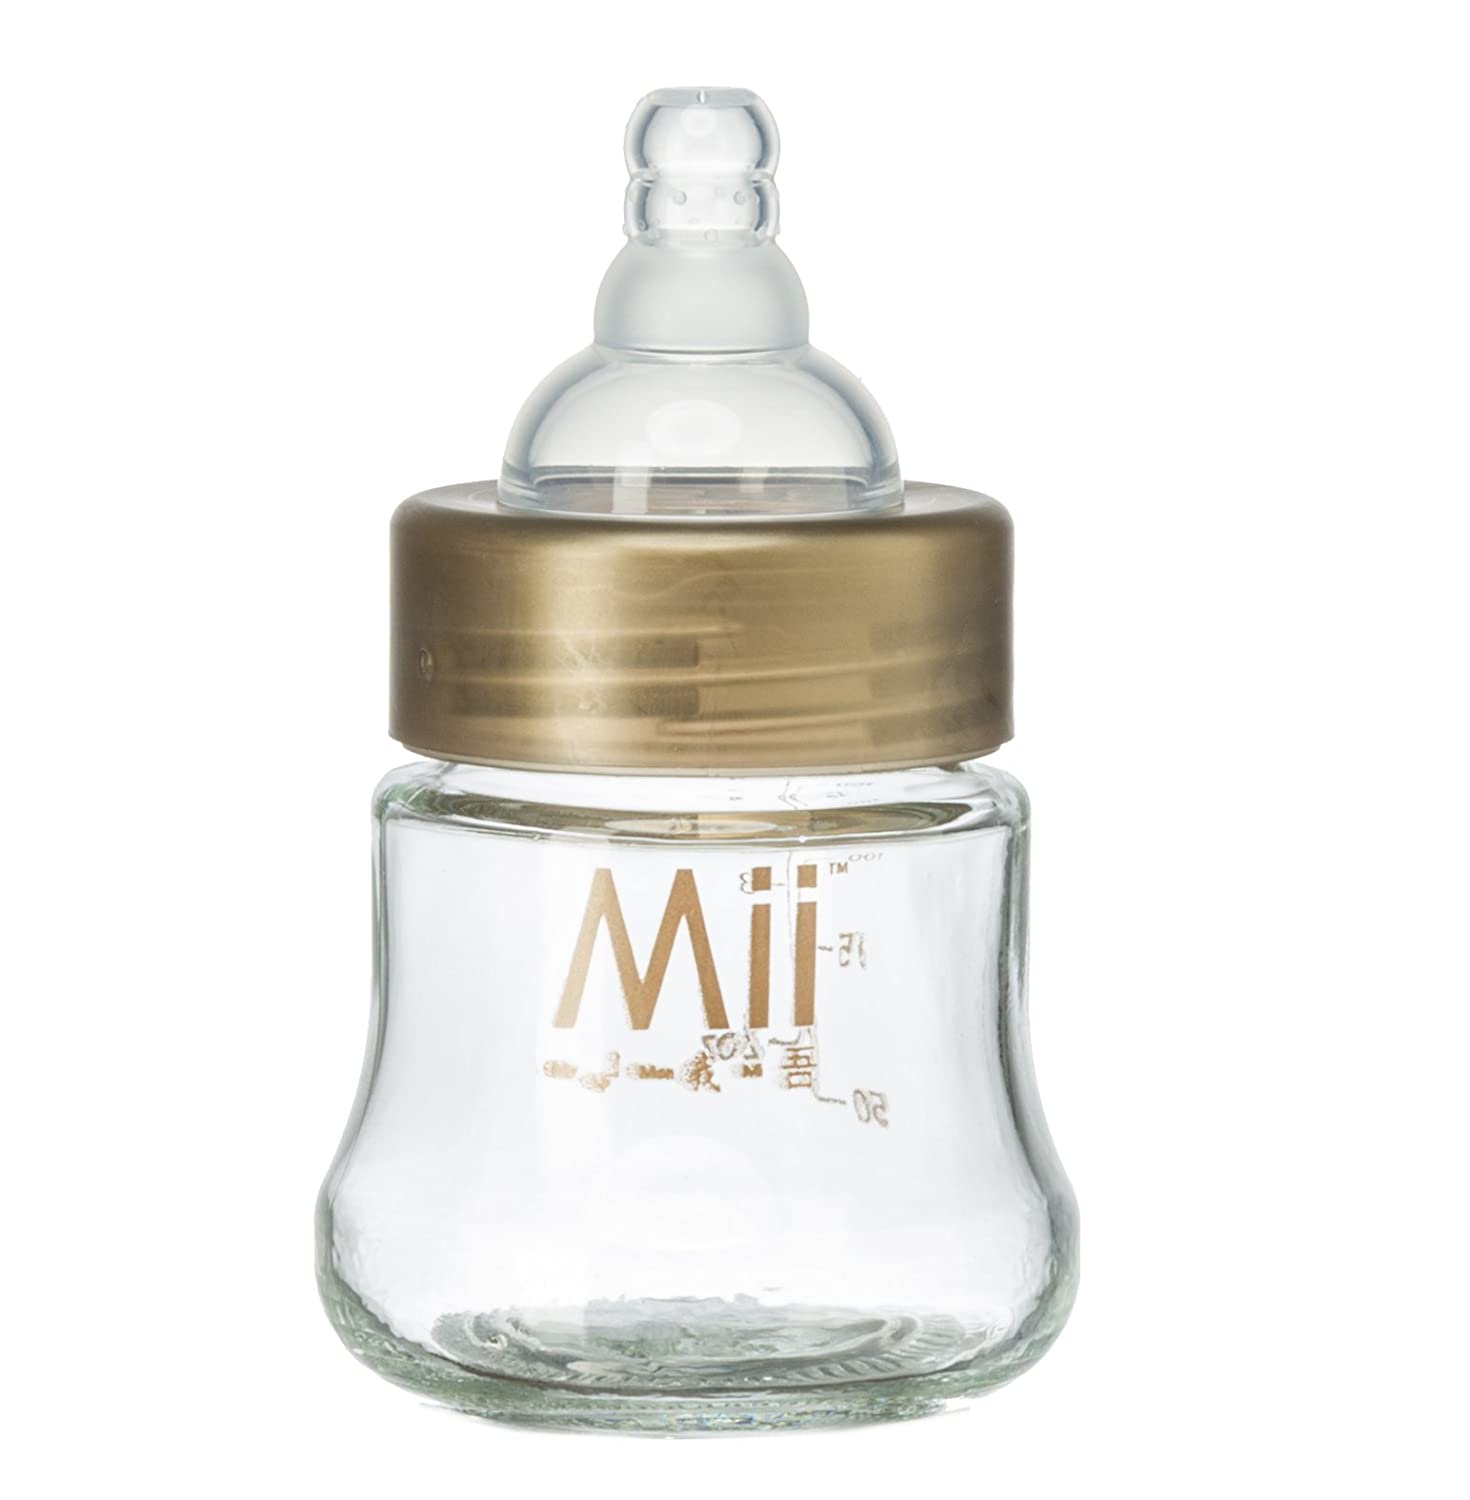 Top 6 Best Glass Baby Bottles Reviews in 2022 1